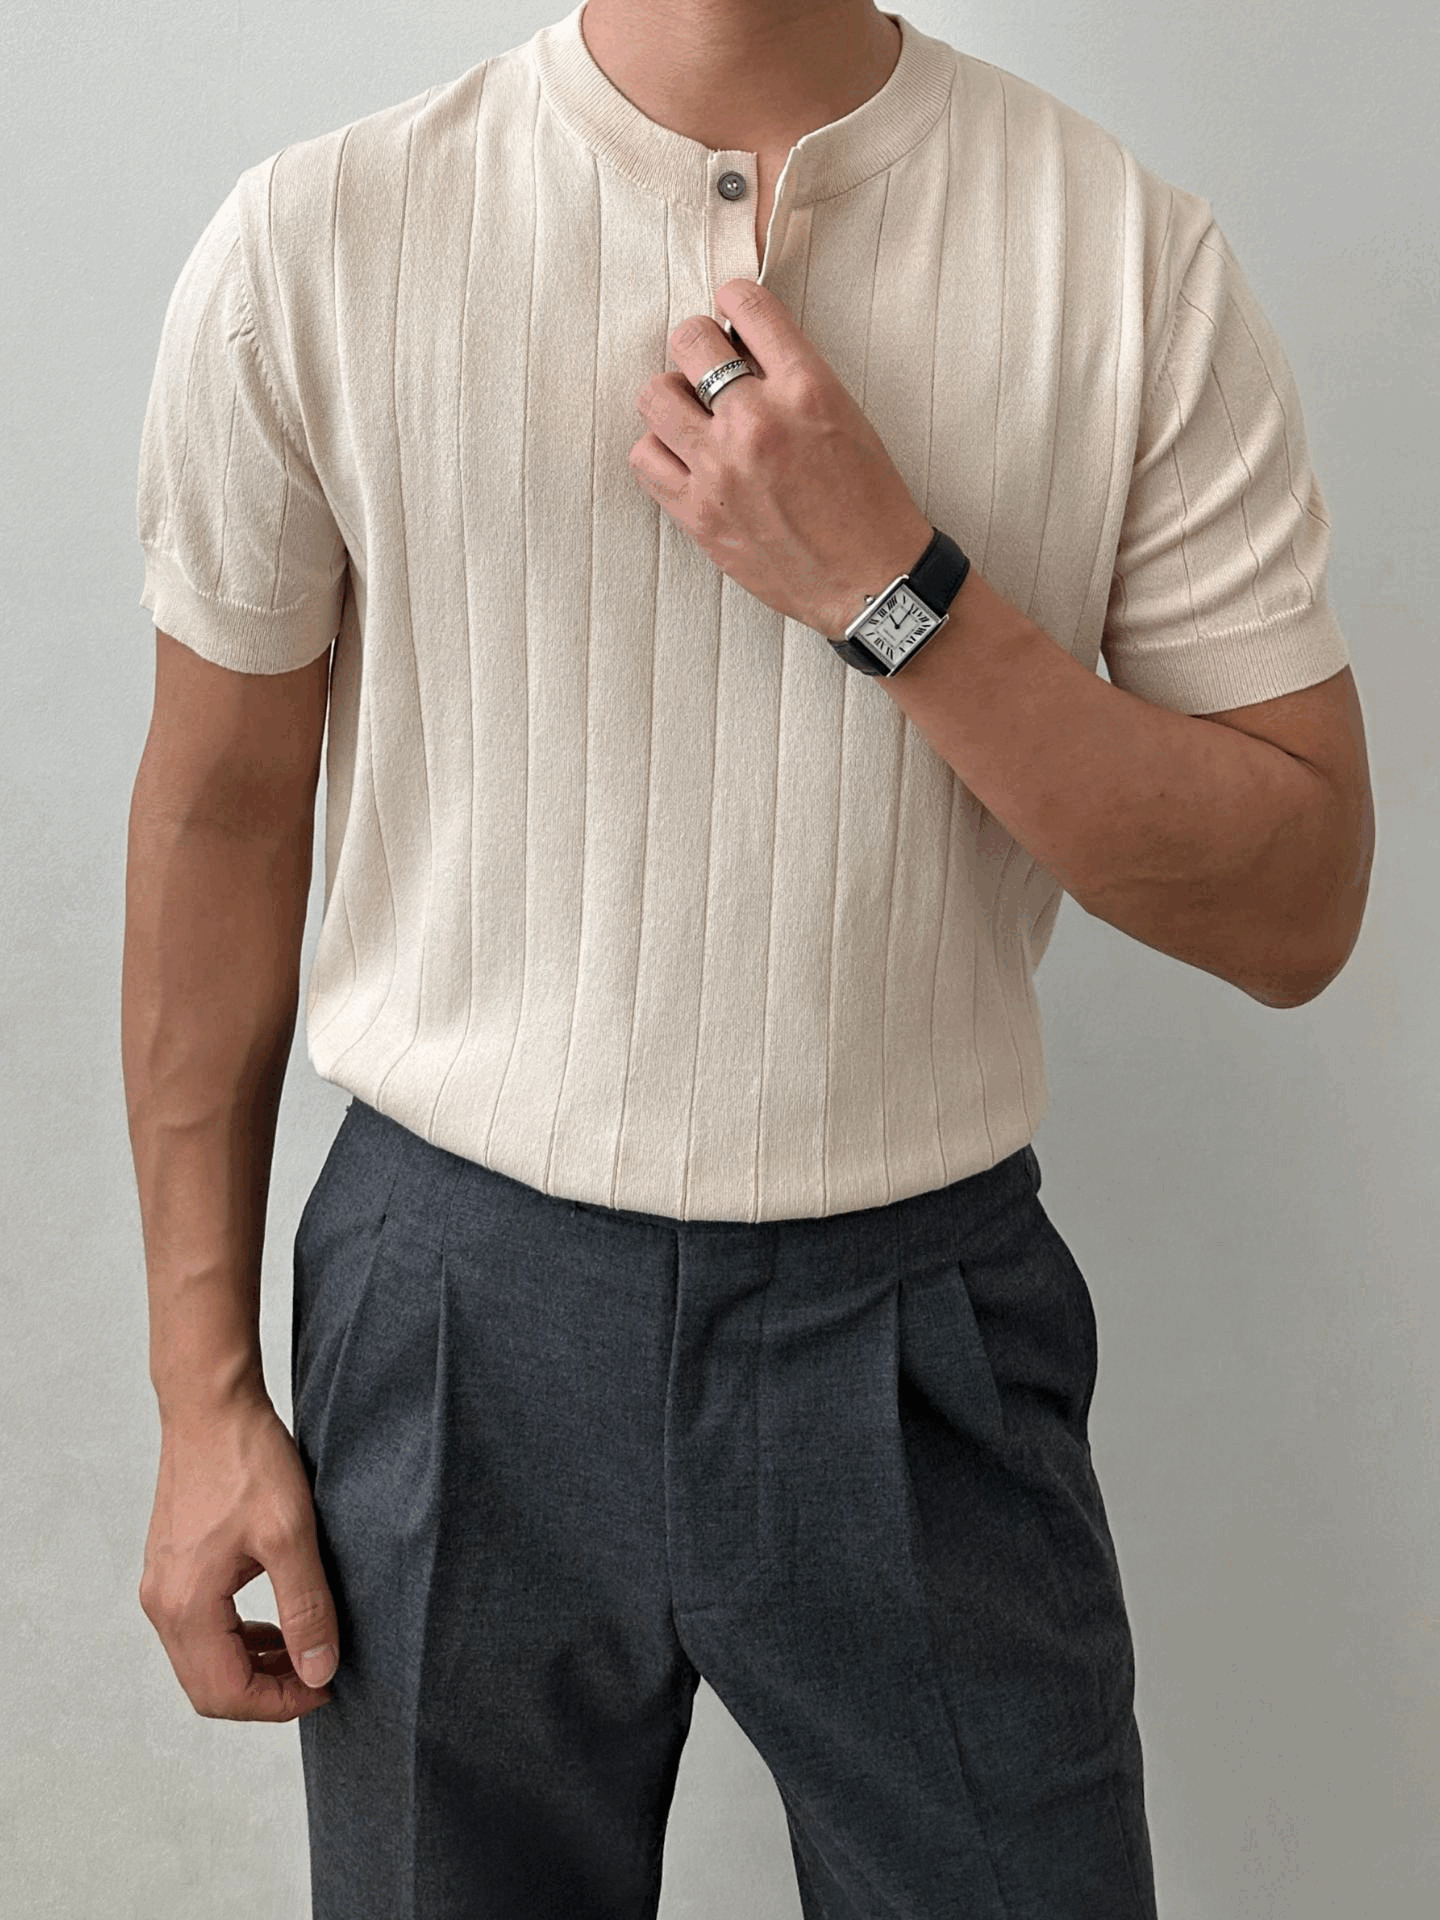 washable ribbed henry neck knitwear